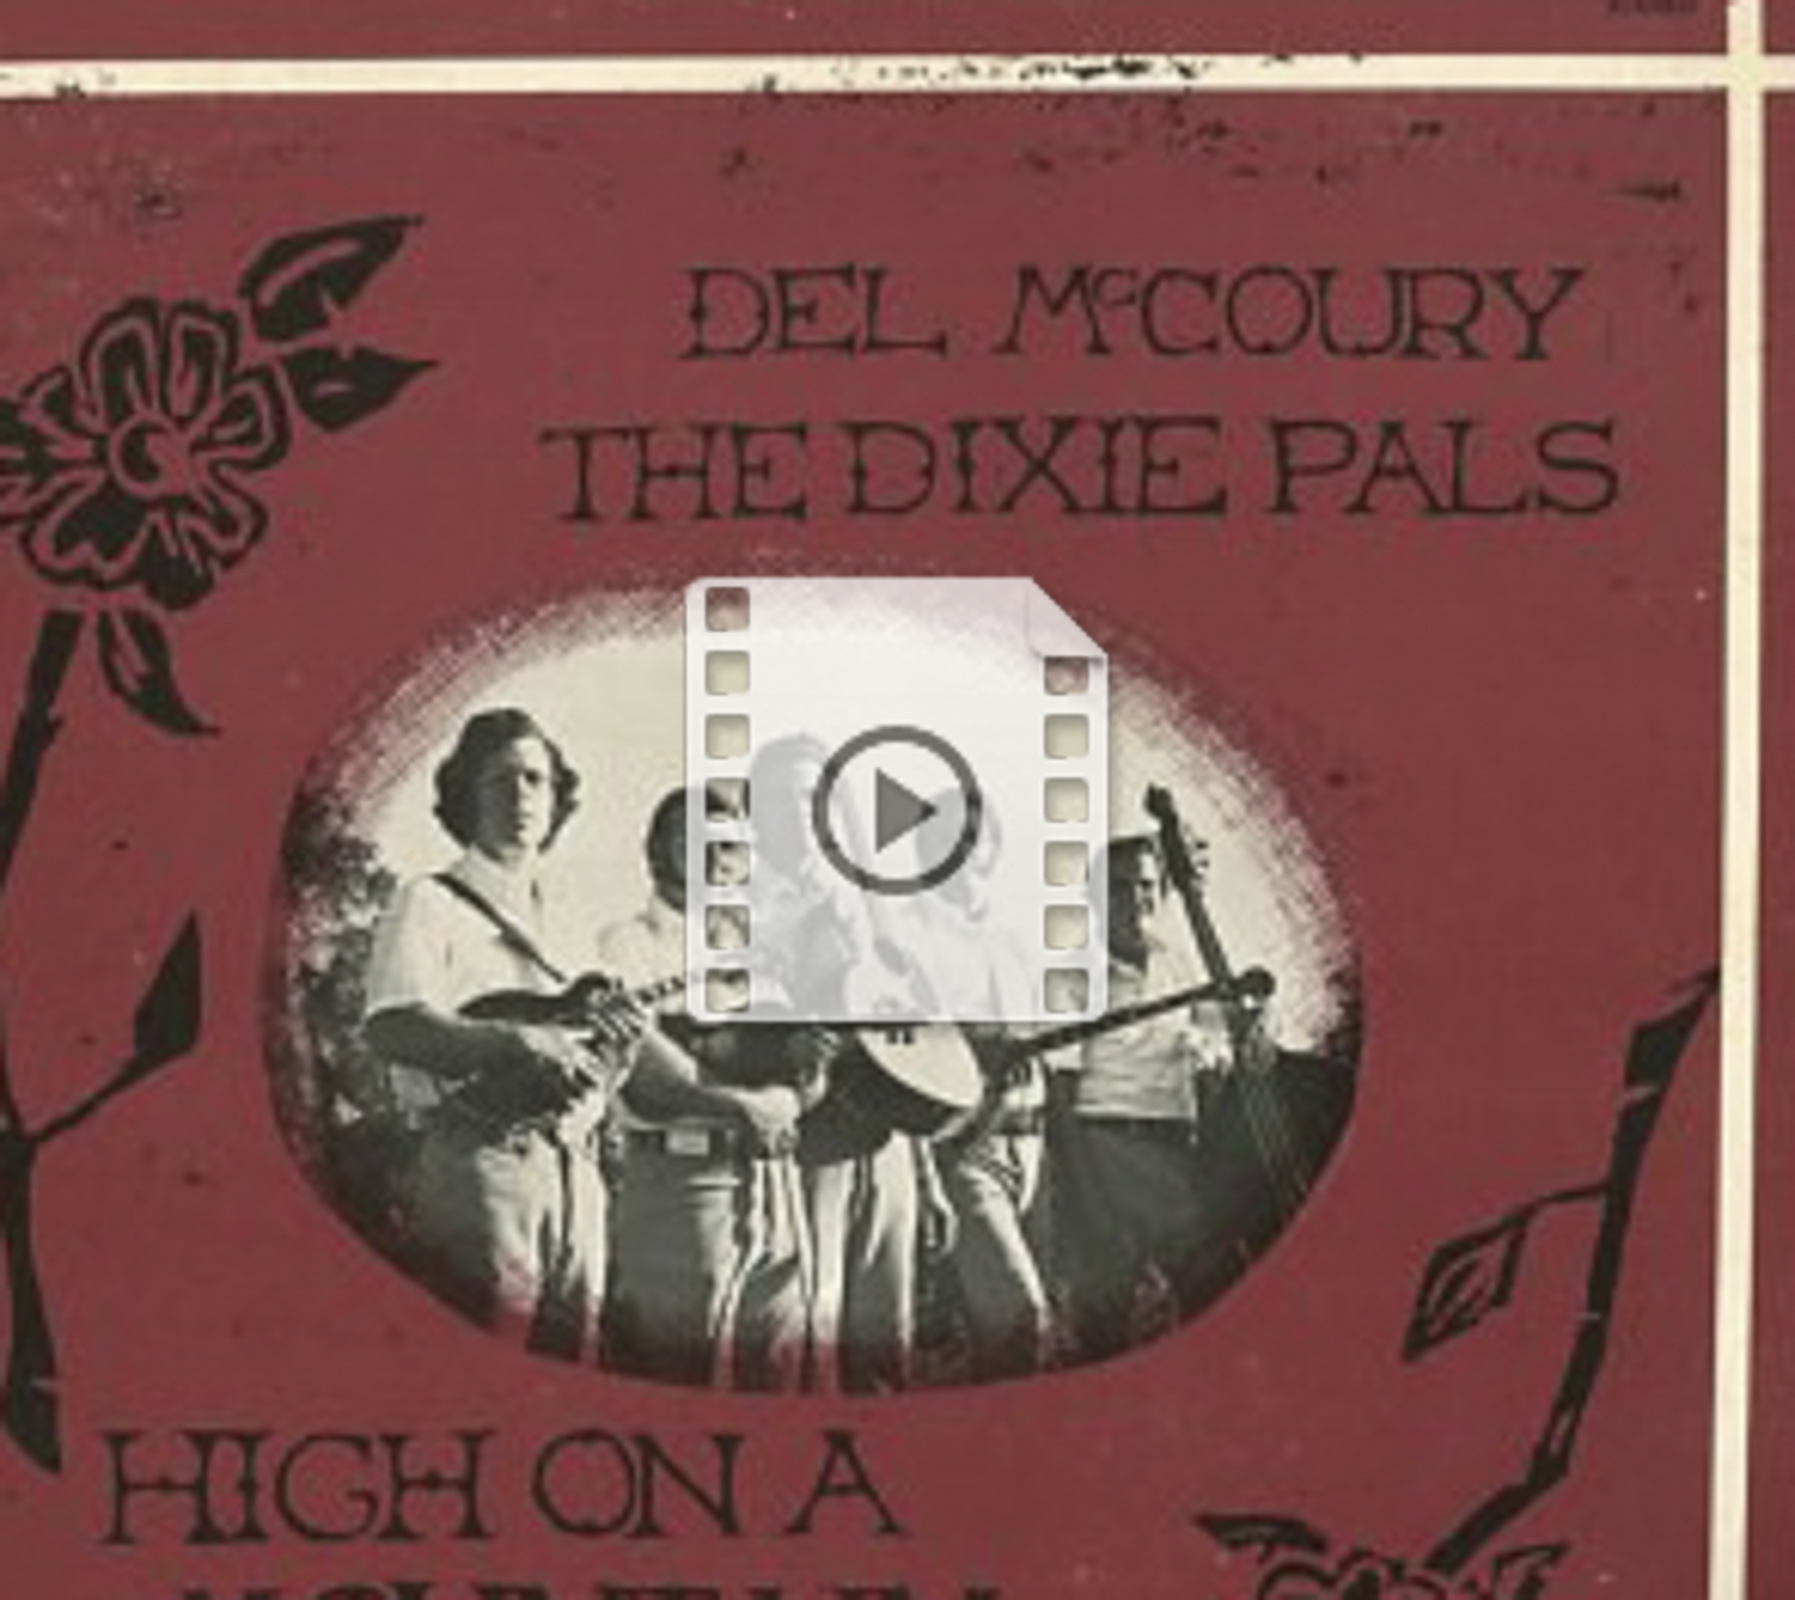 Corinth1981DelMcCoury Del McCoury and the Dixie Pals at the Corinth NY Bluegrass Festival in June, 1981. According to Ronnie McCoury, he was 14 and remembers the festival well because it was his first stage performance with his father's band. The Dixie Pals at the time also included Del's brother Jerry on bass, the late great Sonny Miller on fiddle, and Dick Smith on banjo. The encore "Loggin Man" was requested by our close friend Floyd Scholz who had recently moved to Vermont and was supporting himself as a lumberjack.